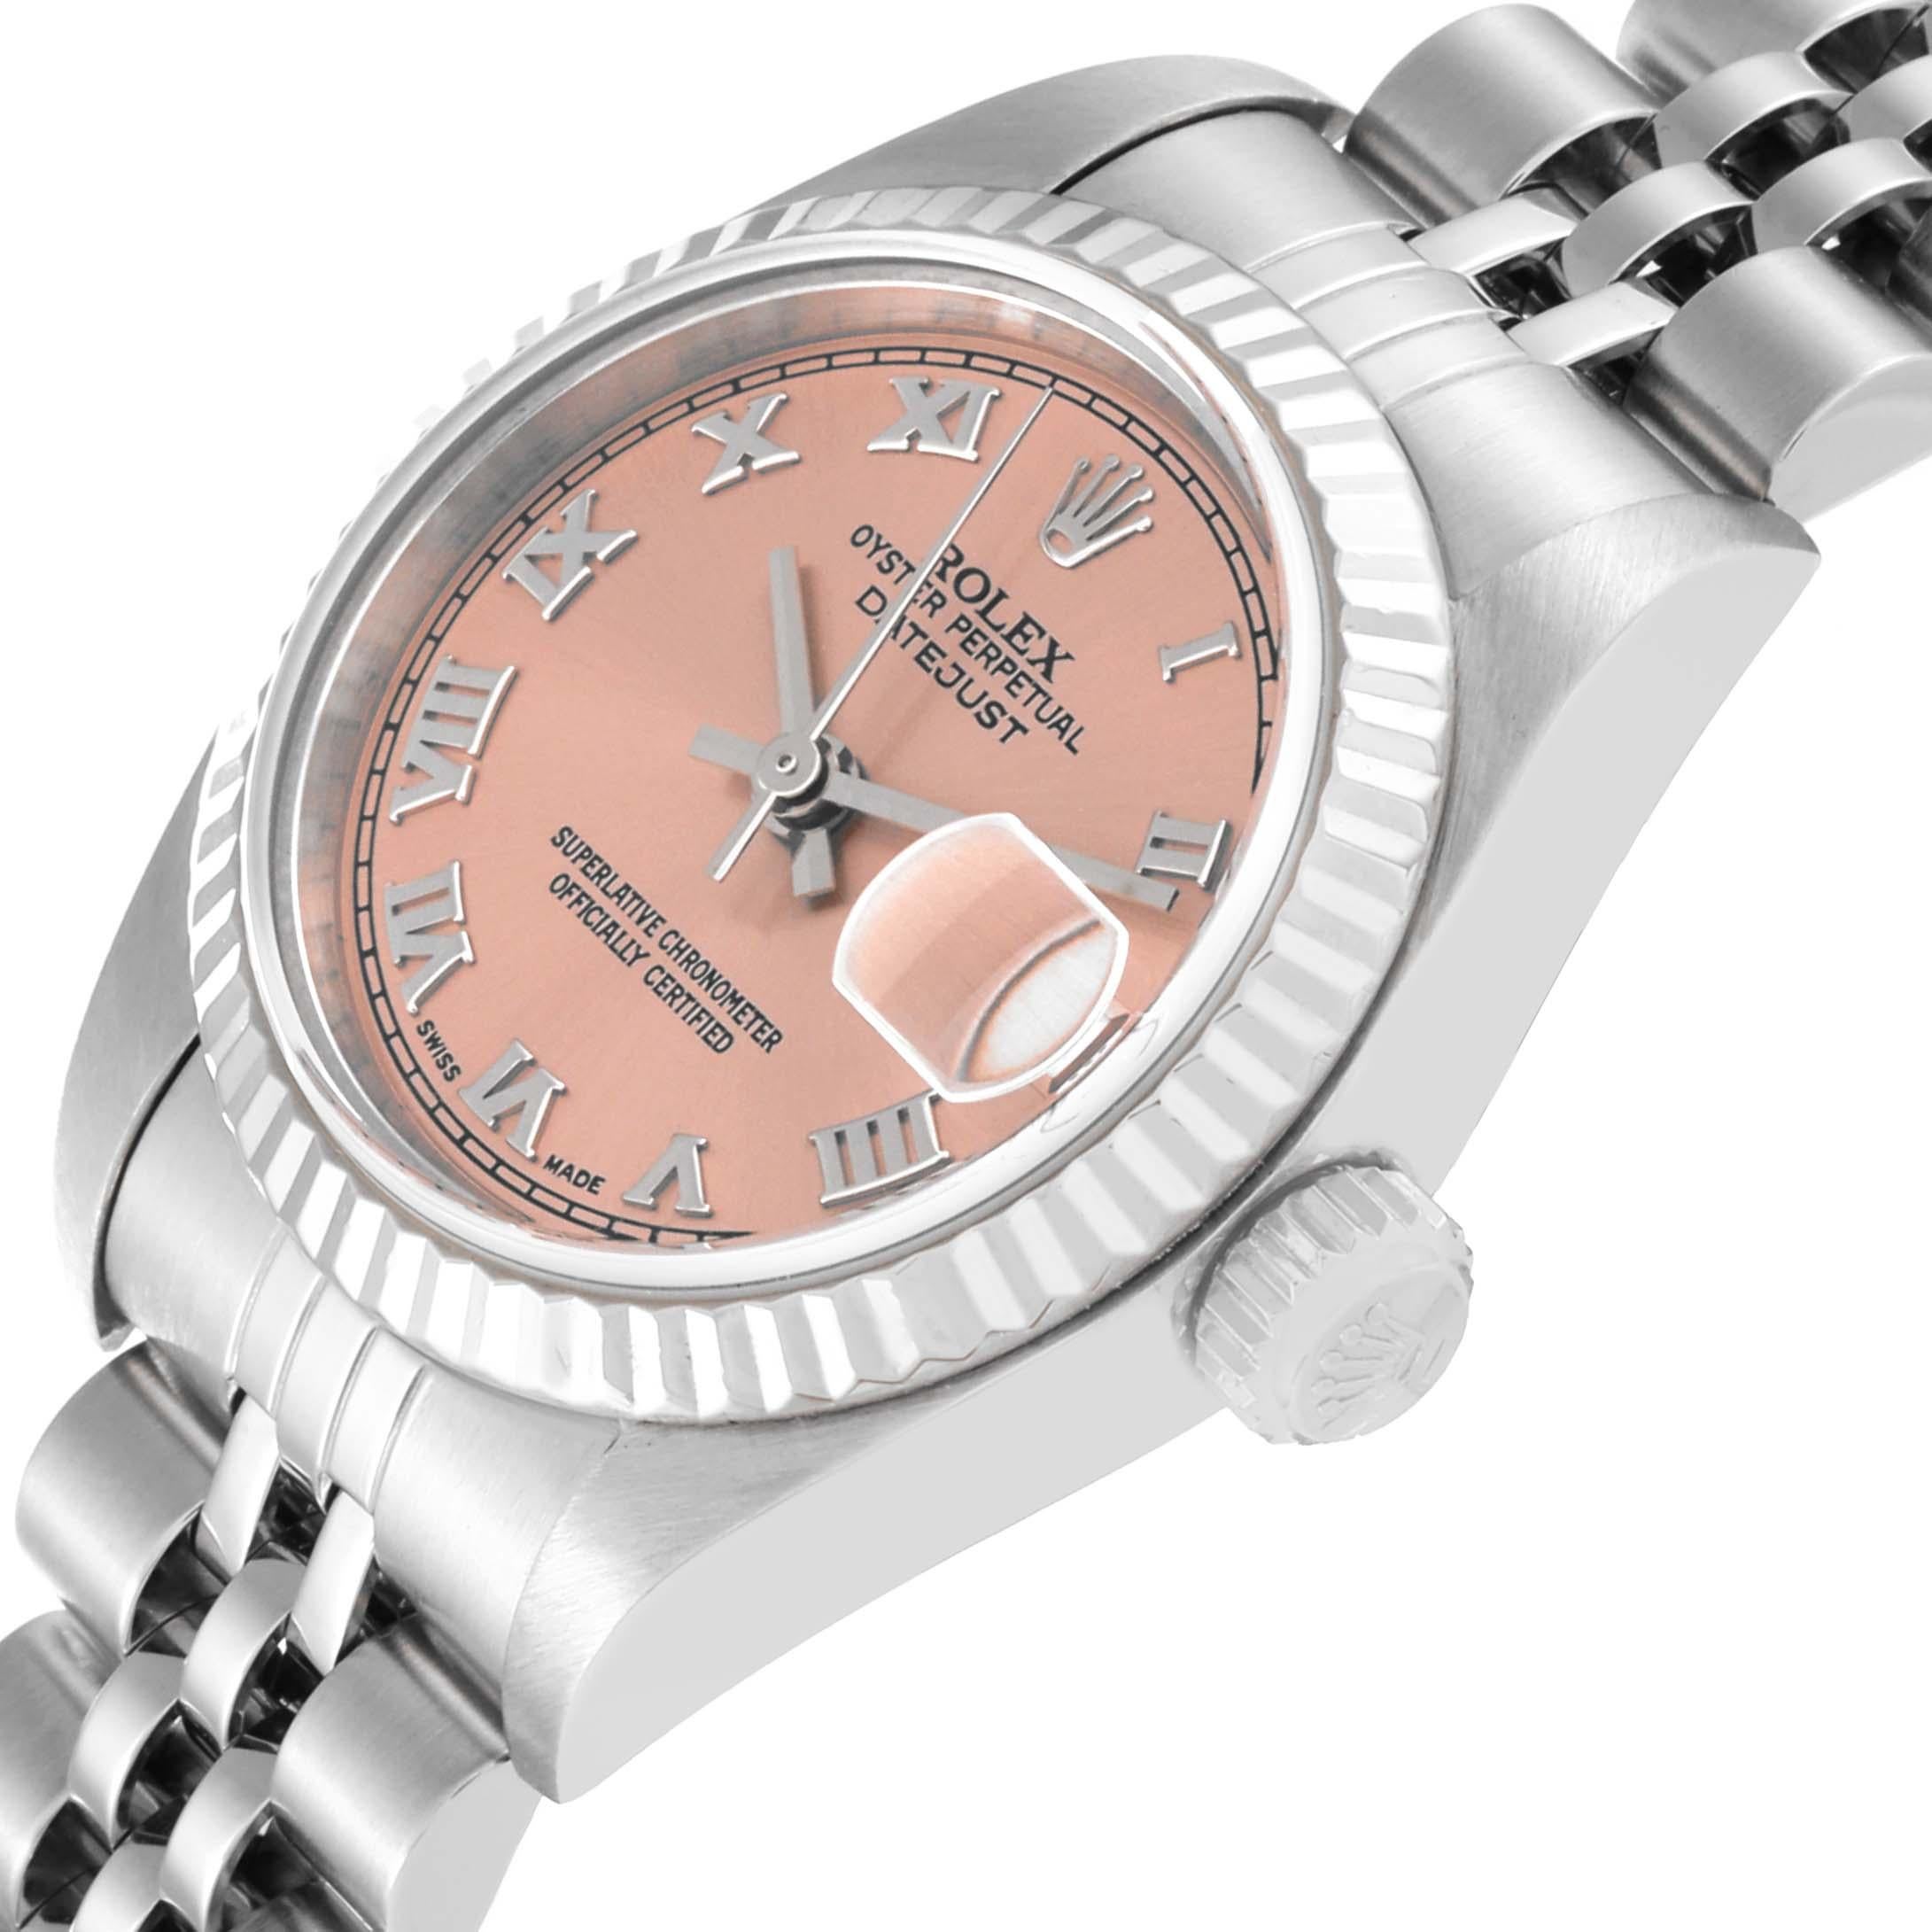 Rolex Datejust Salmon Dial White Gold Steel Ladies Watch 79174 For Sale 1